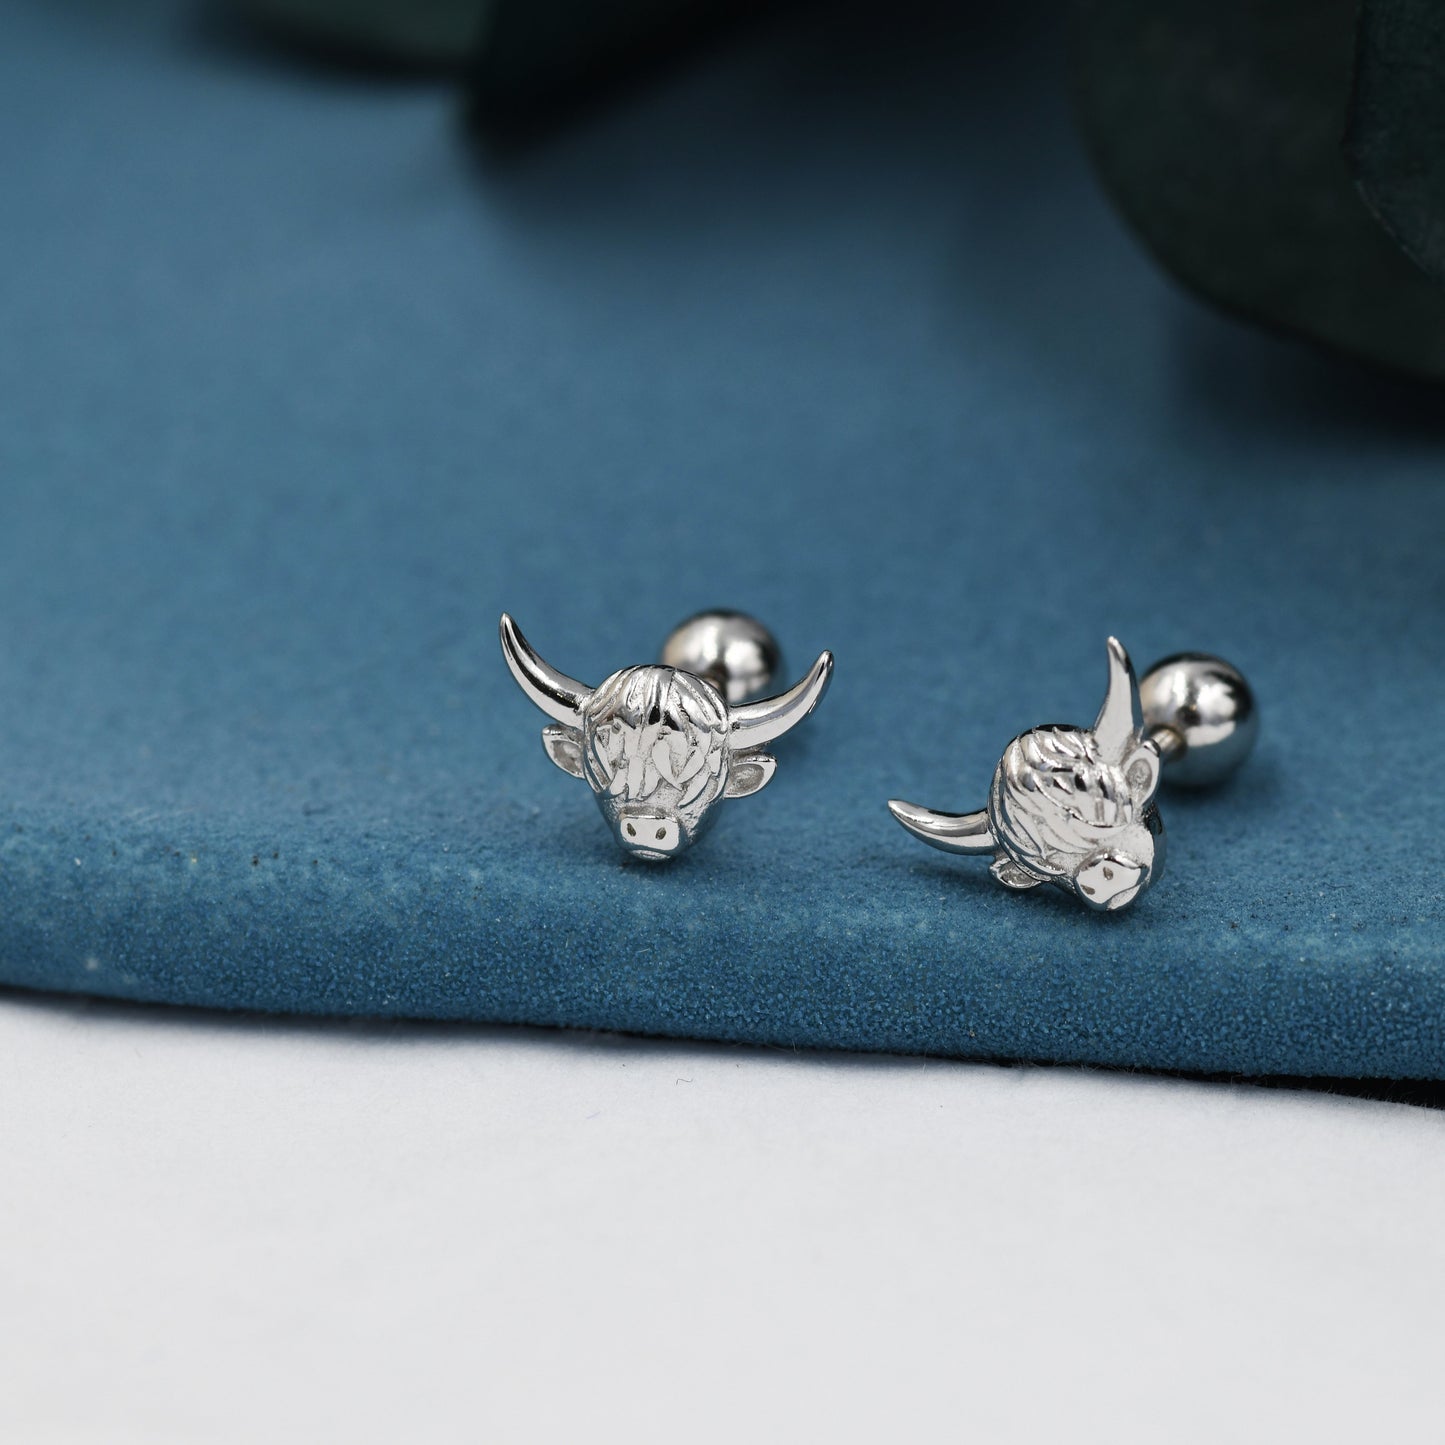 Extra Tiny Highland Cow Barbell Earrings in Sterling Silver, Available in Two Sizes Cow Stud, Bull Earrings, Screw-back, Small Cow Stud